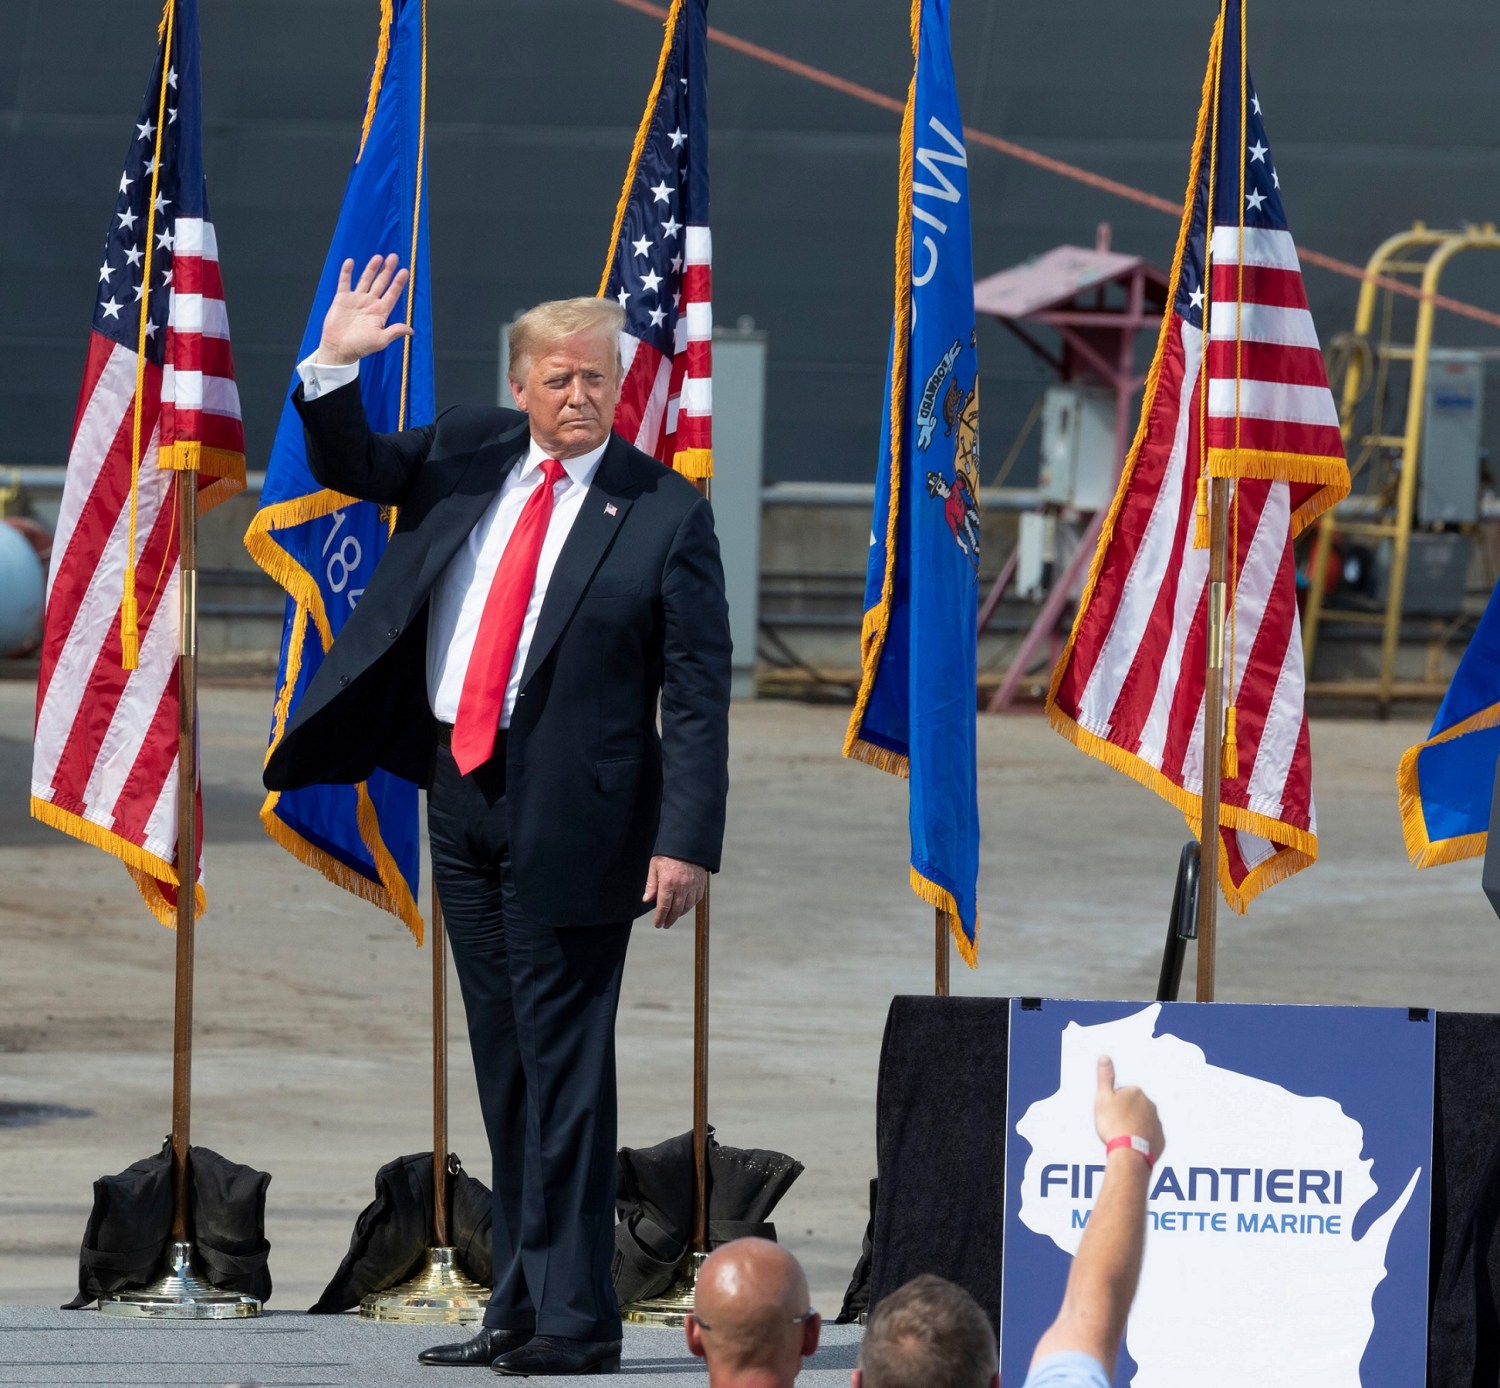 President Trump speaks Thursday, June 25, 2020 at Fincantieri Marinette Marine in Marinette, Wis. Trump's visit comes in the middle of his reelection bid against former Vice President Joe Biden, who secured the Democratic nomination earlier this month after a crowded primary contest. Both candidates hope to claim Wisconsin this November after Trump narrowly won the state in 2016, handing it to Republicans for the first time in years.MJS-gilbert26p3